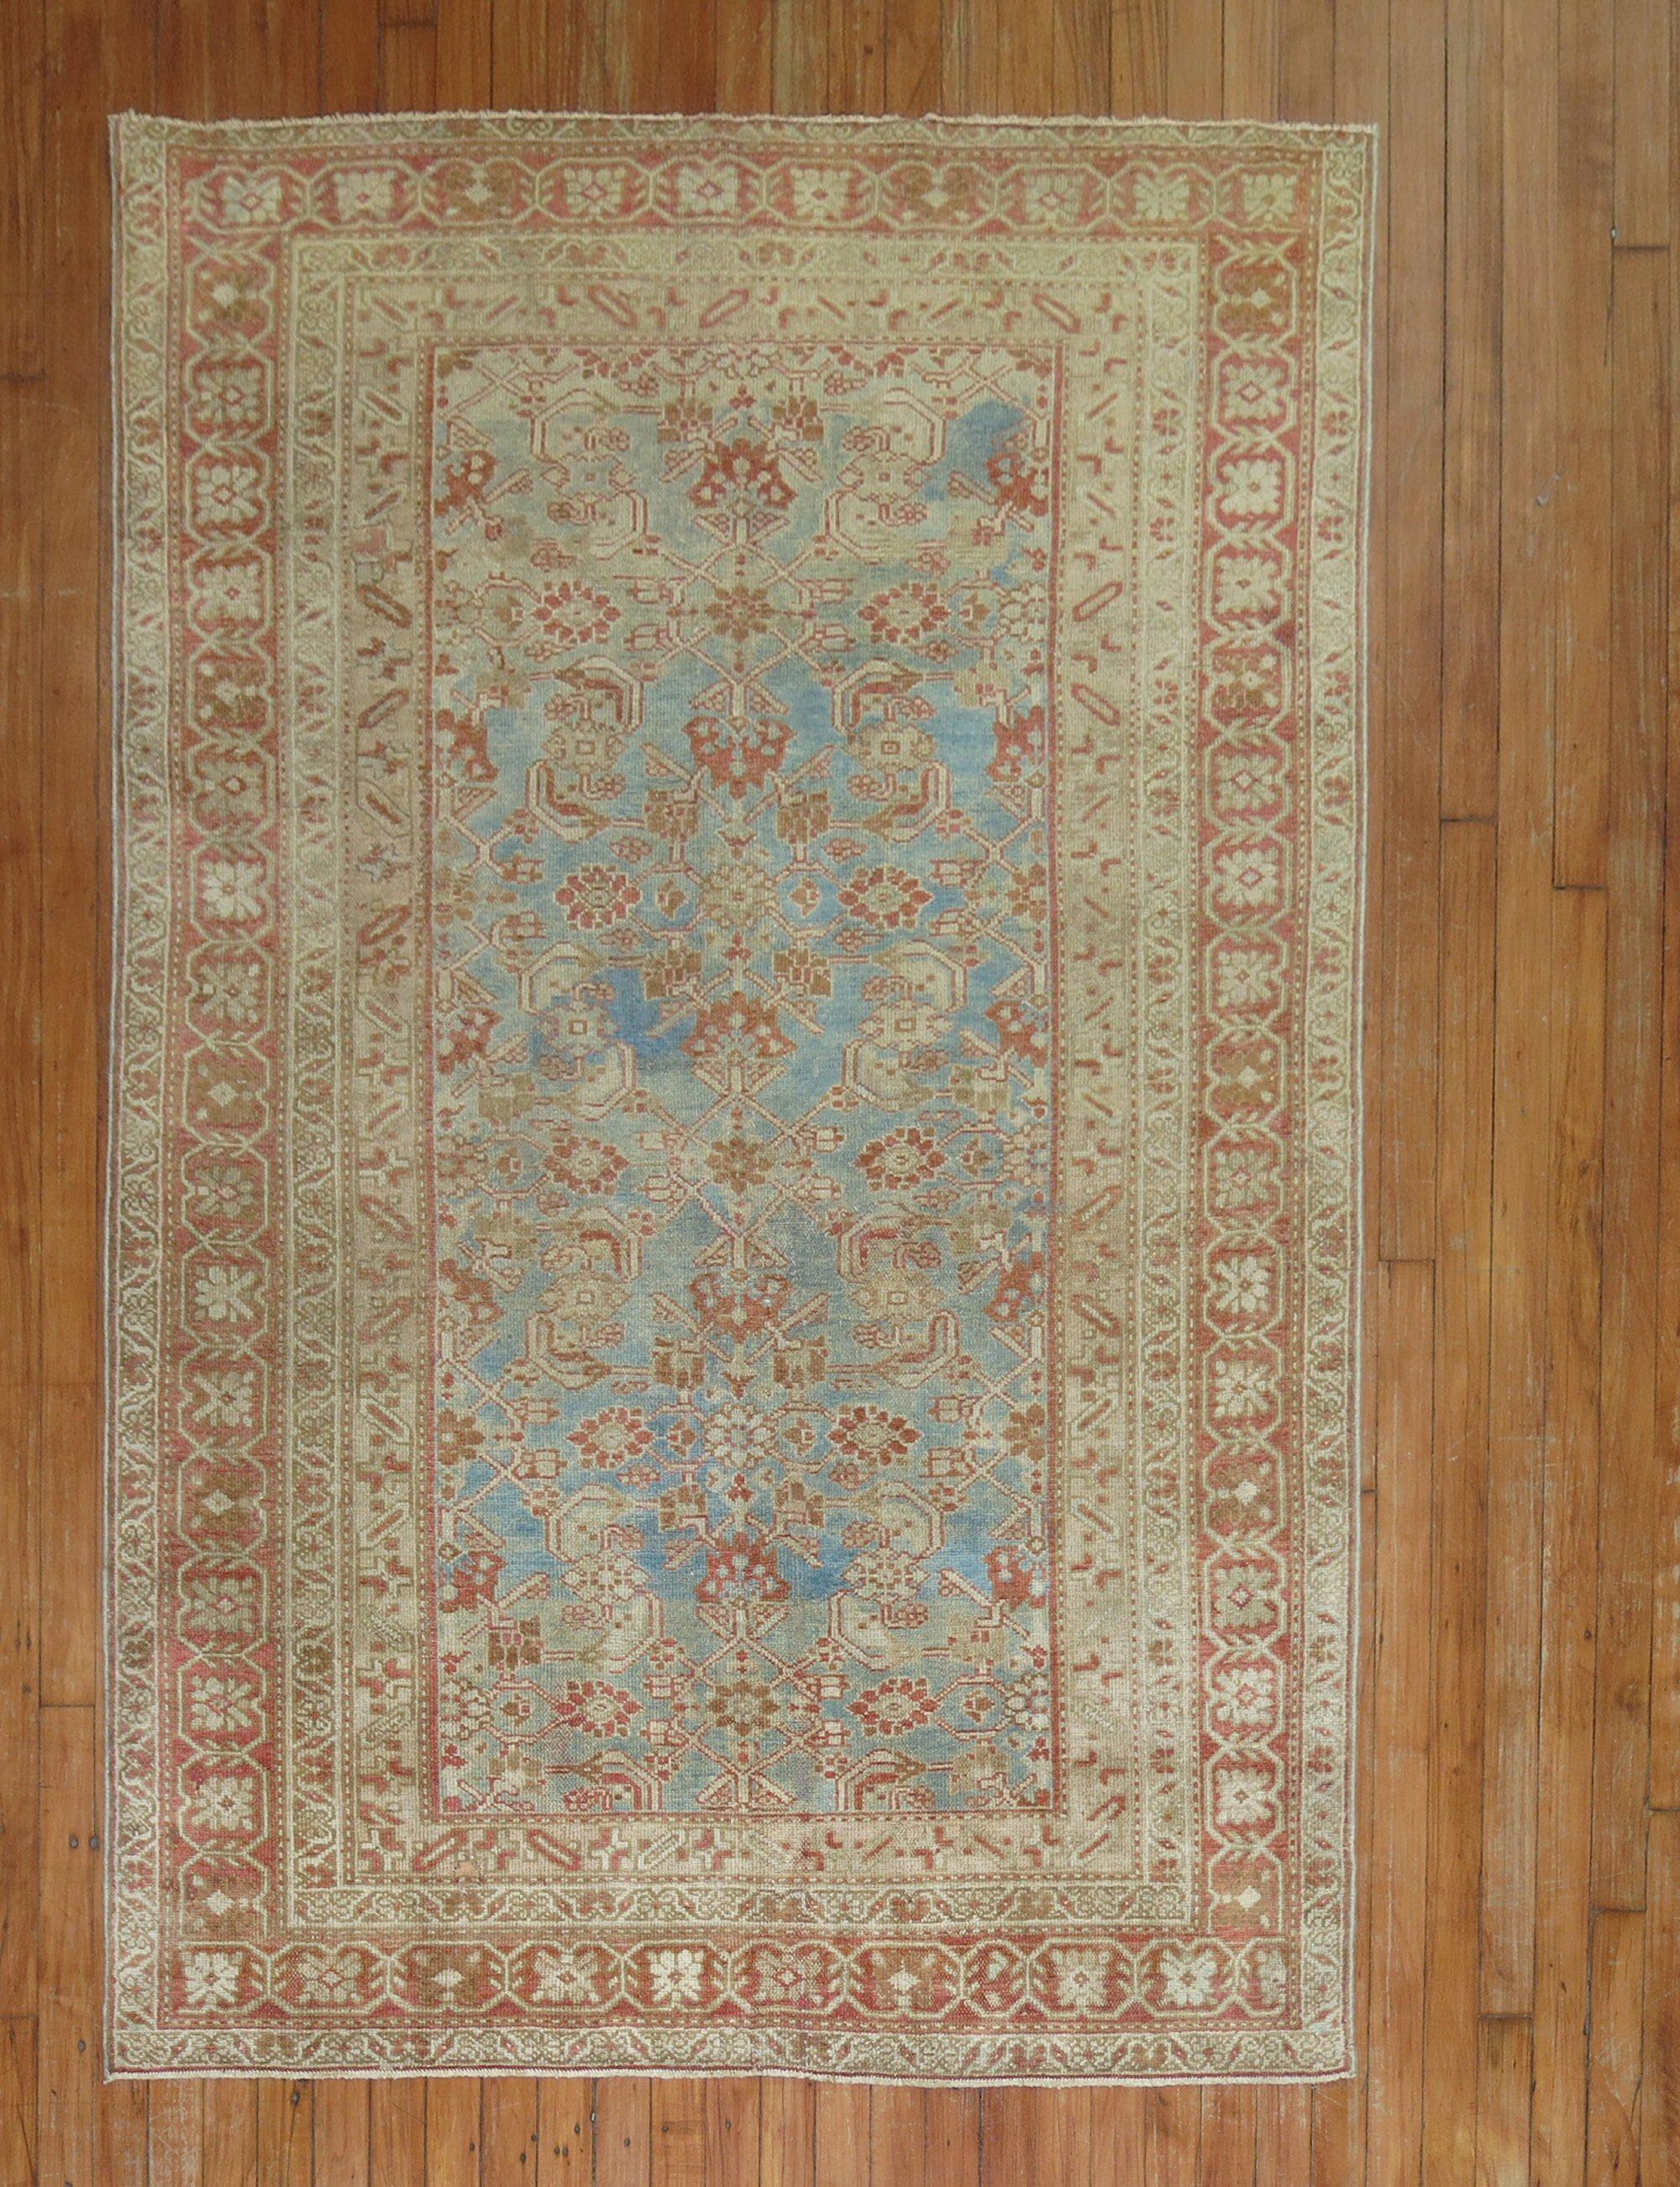 Highly decorative antique early 20th century Persian Malayer rug with a light blue ground and rust accents on a traditional all-over Herati design

Measures: 4'3' x 6'4